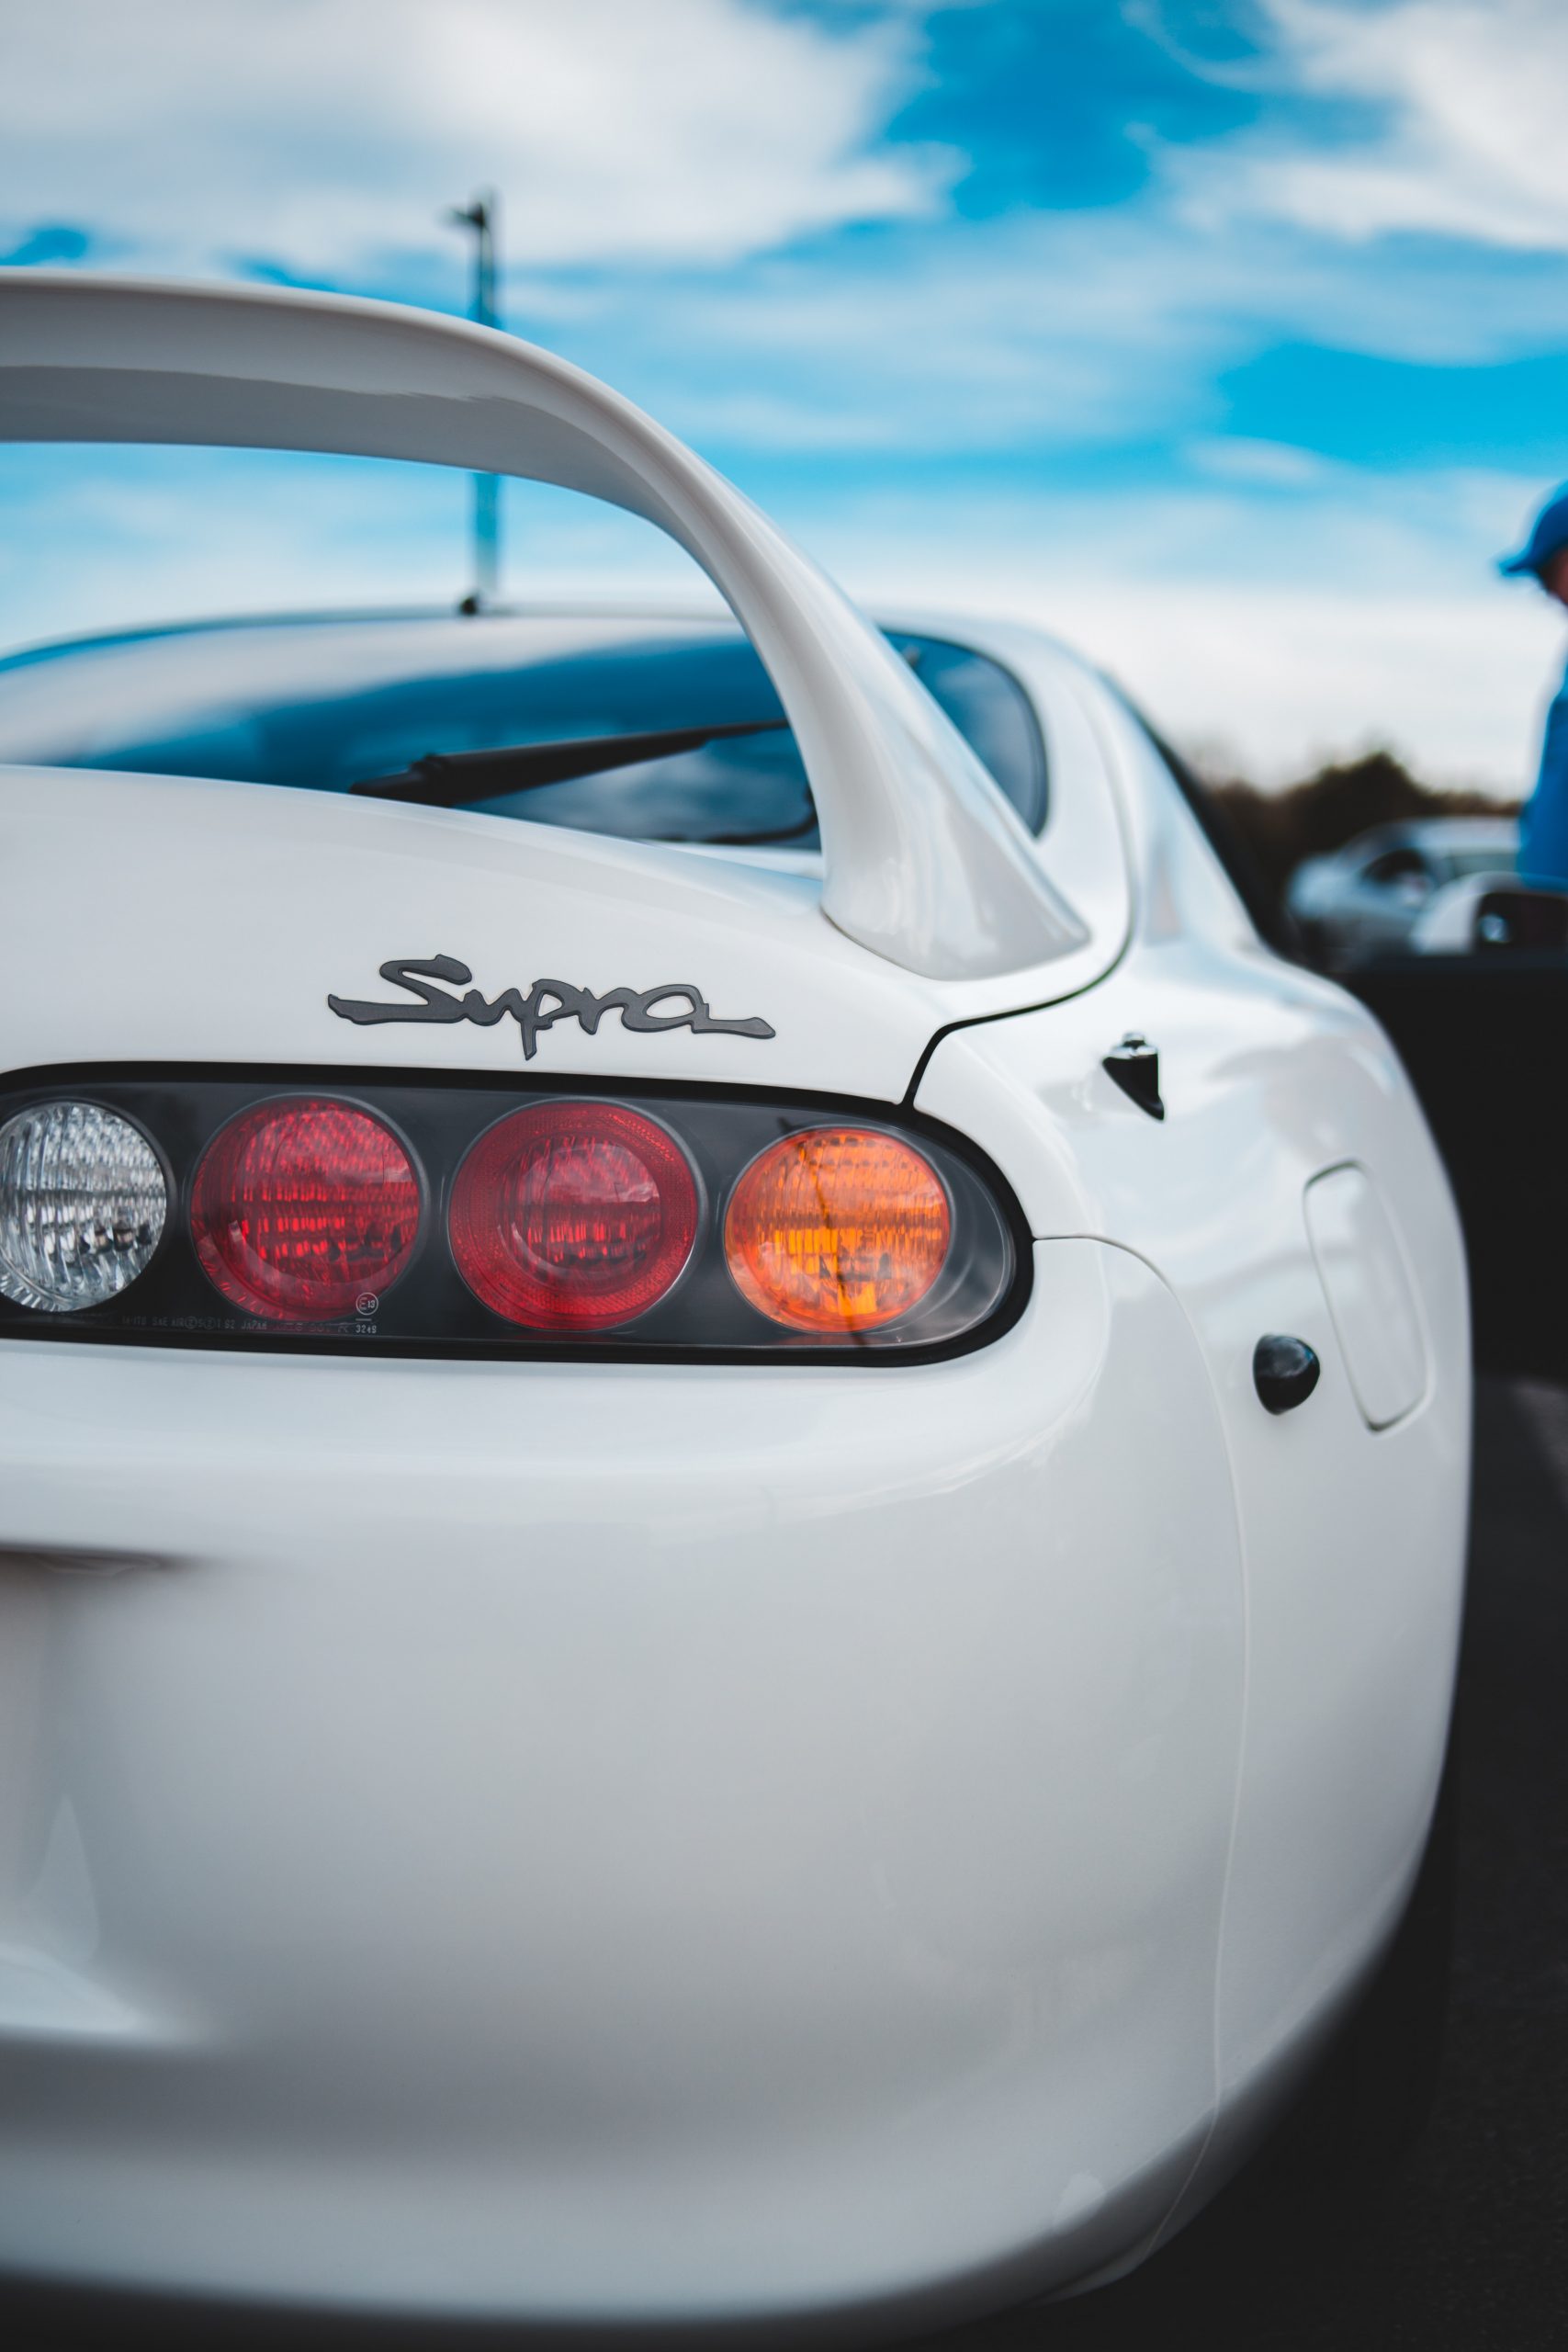 Why Is The 1994 Toyota Supra Banned